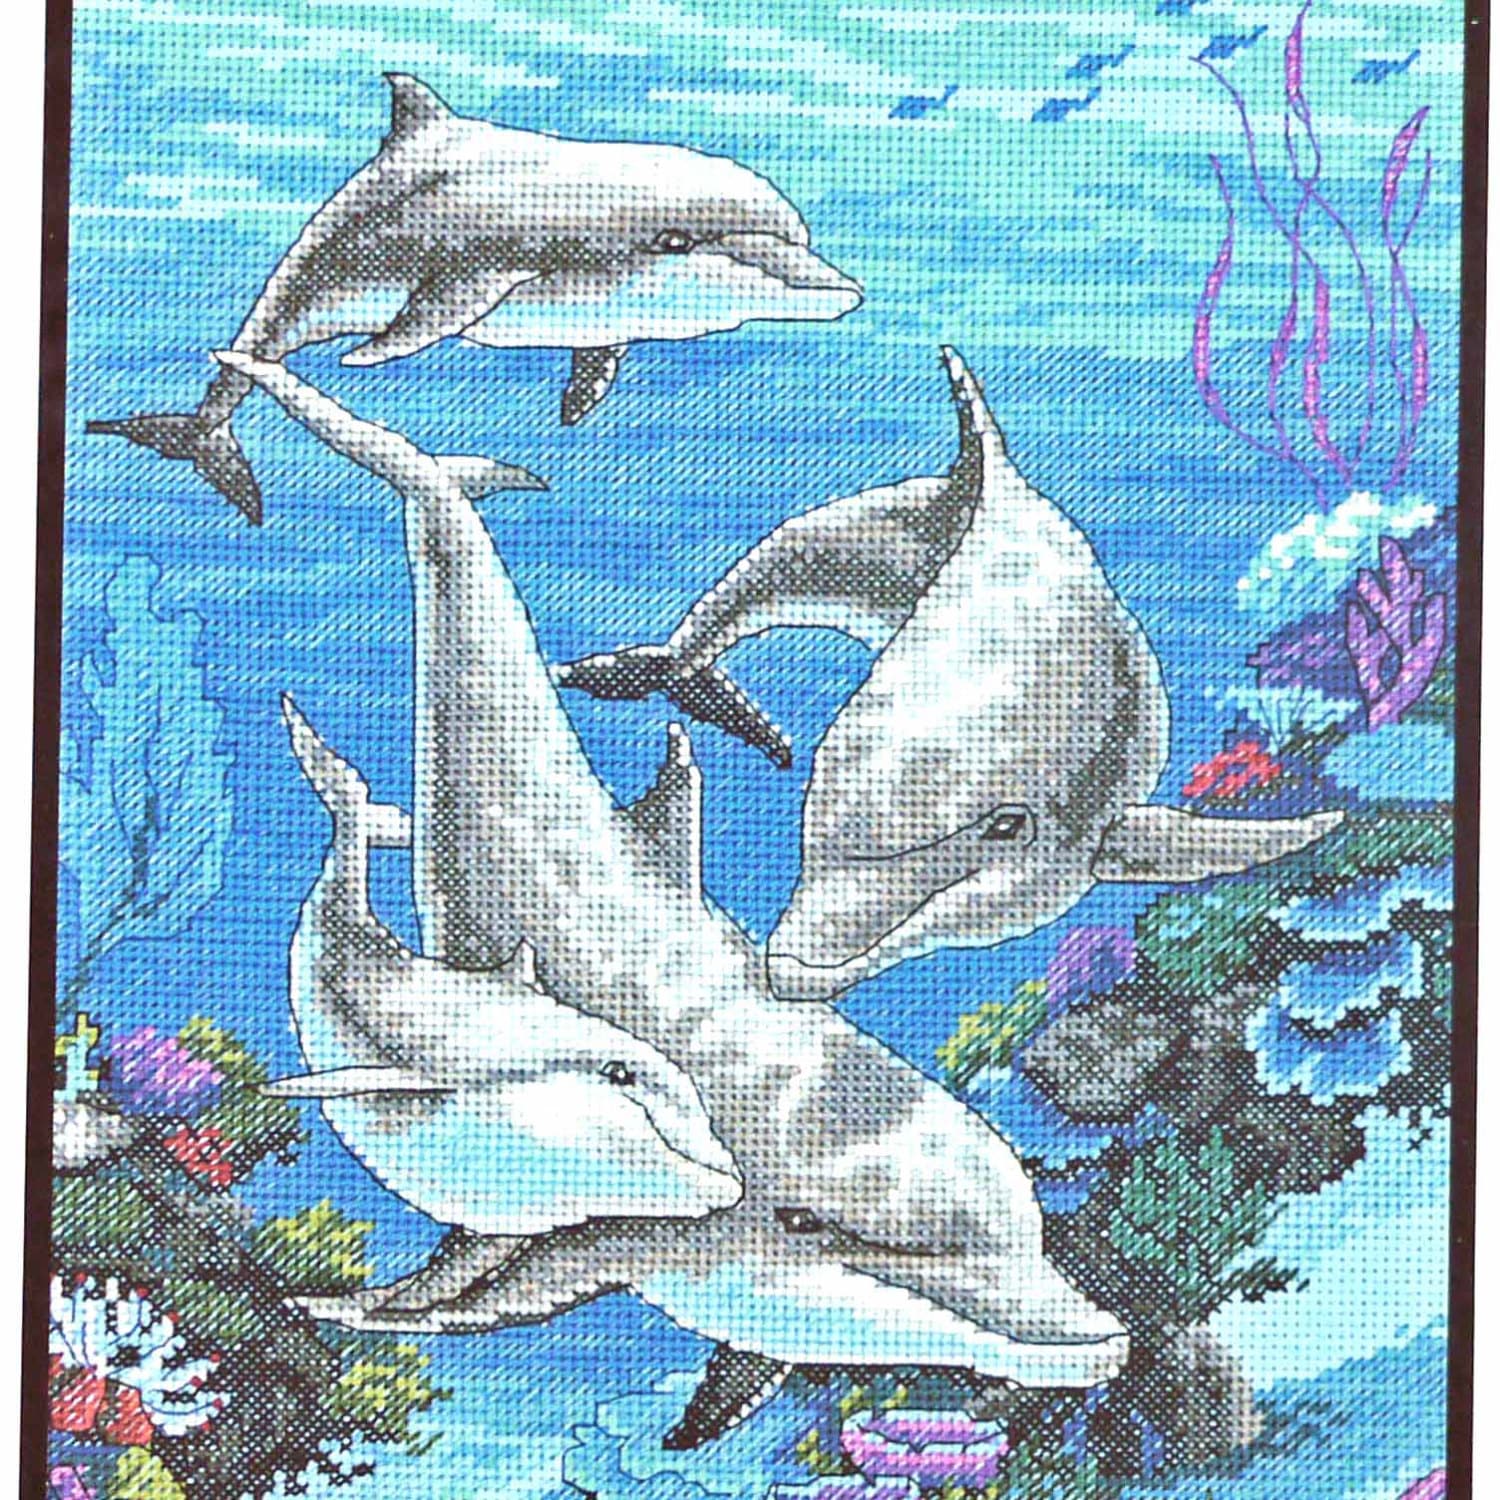 blogger101-dolphin-cross-stitch-patterns-miami-dolphins-football